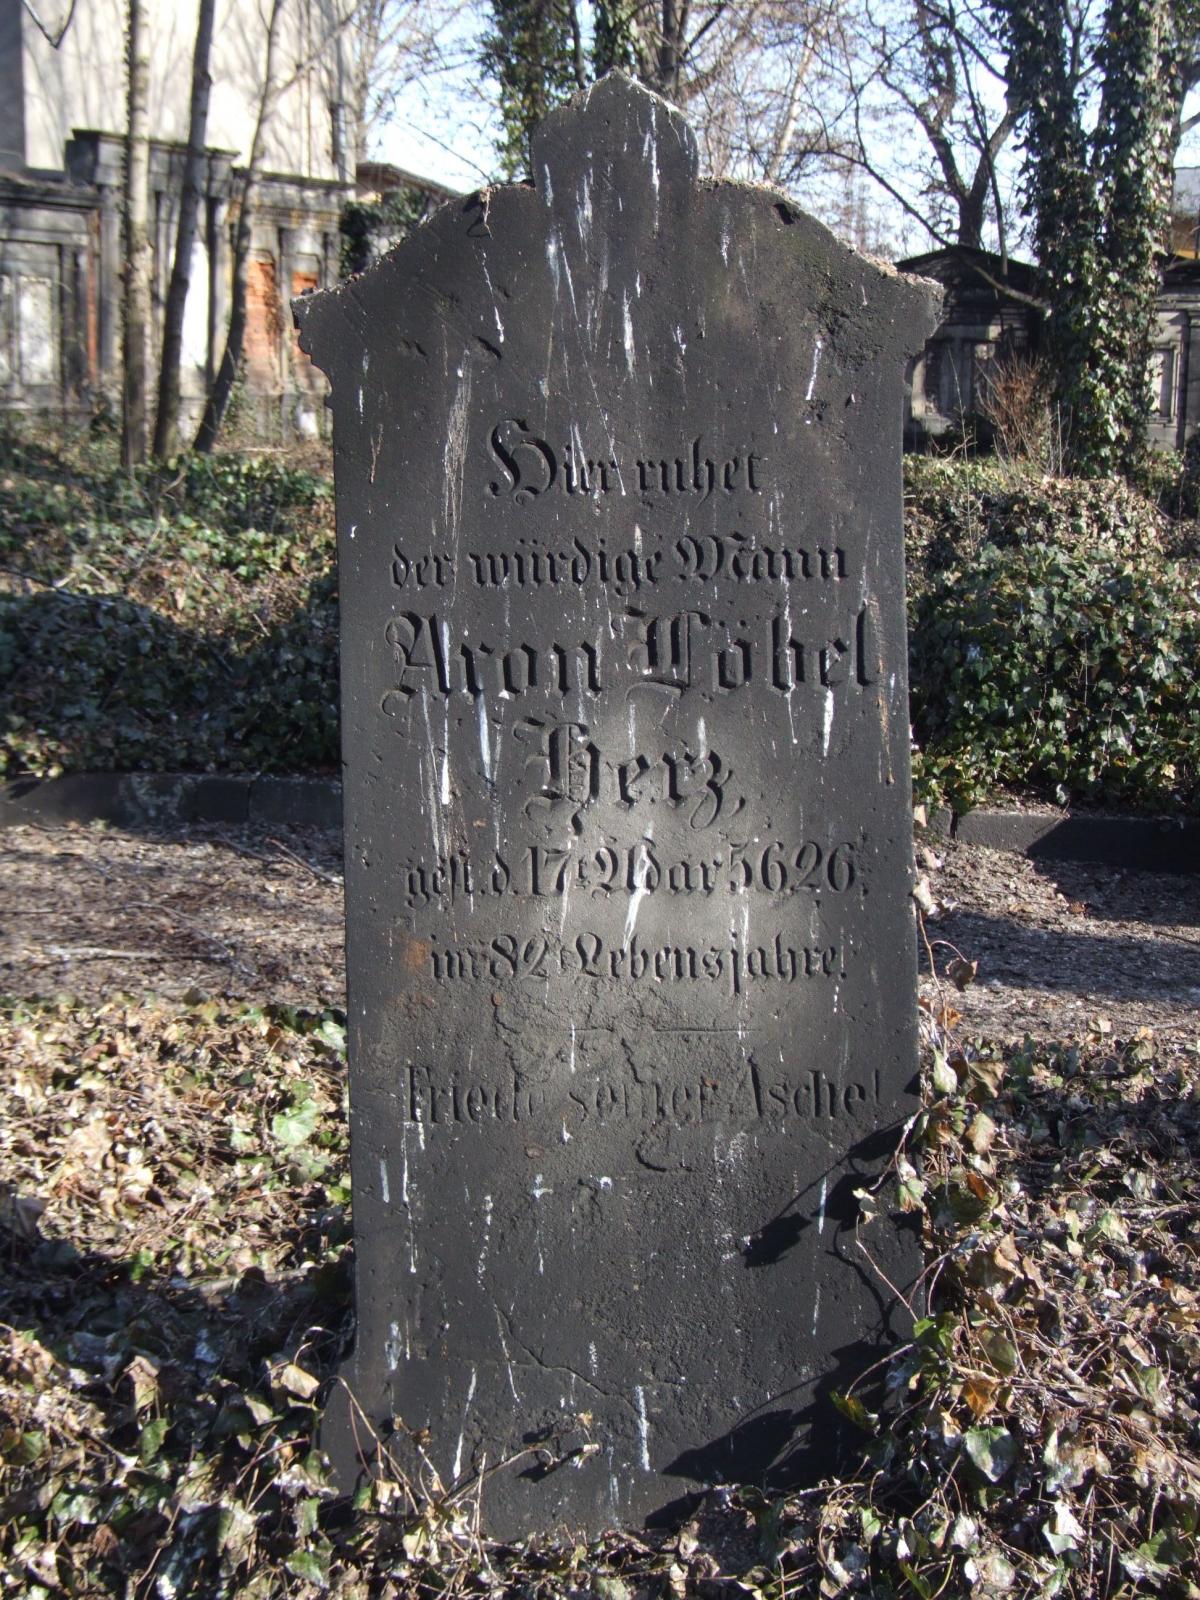 Wikipedia, Images by Marcin Szala, Old Jewish Cemetery in Gliwice, Self-published work